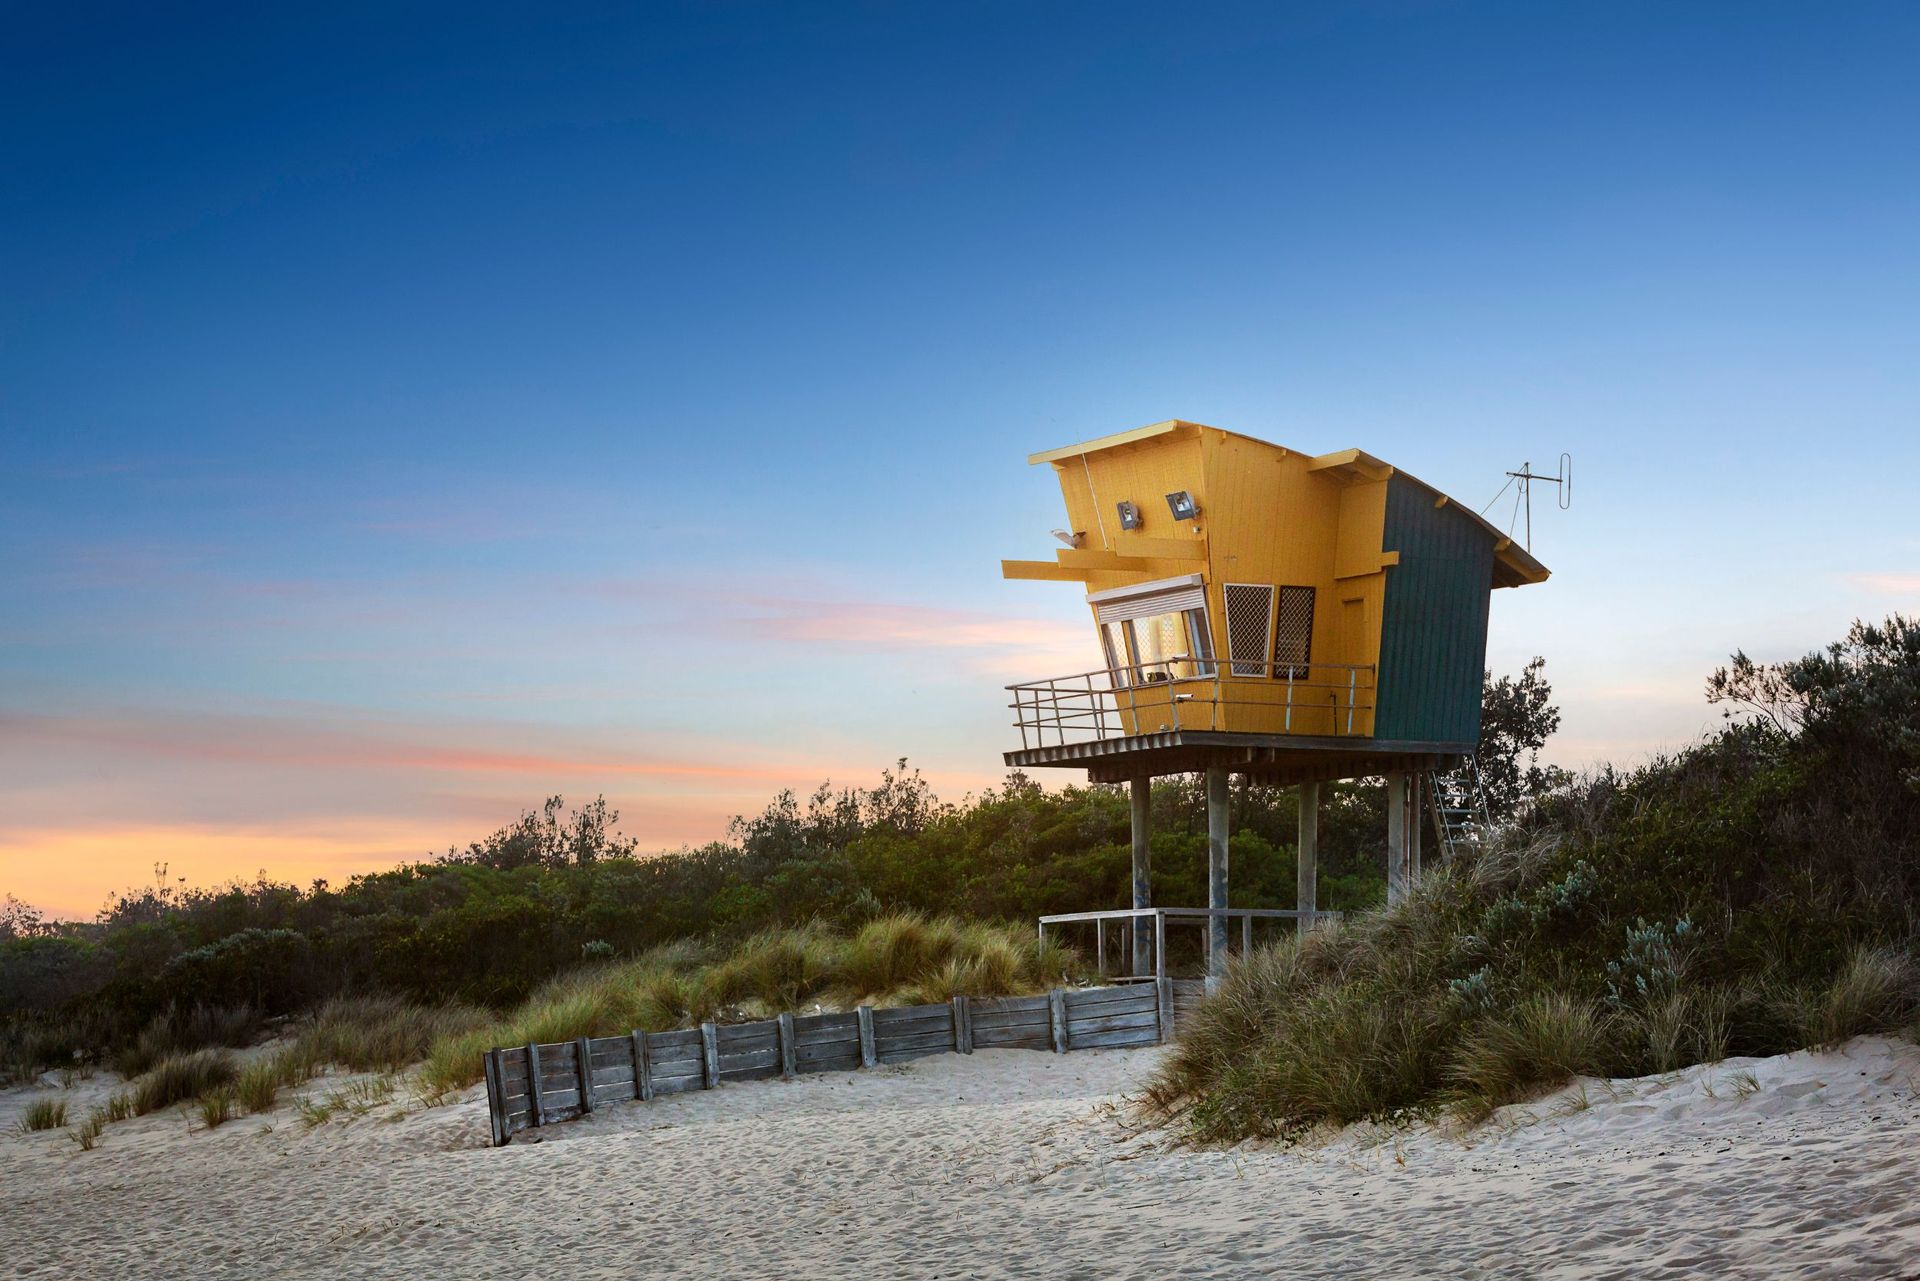 A yellow lifeguard tower is sitting on top of a sandy beach.